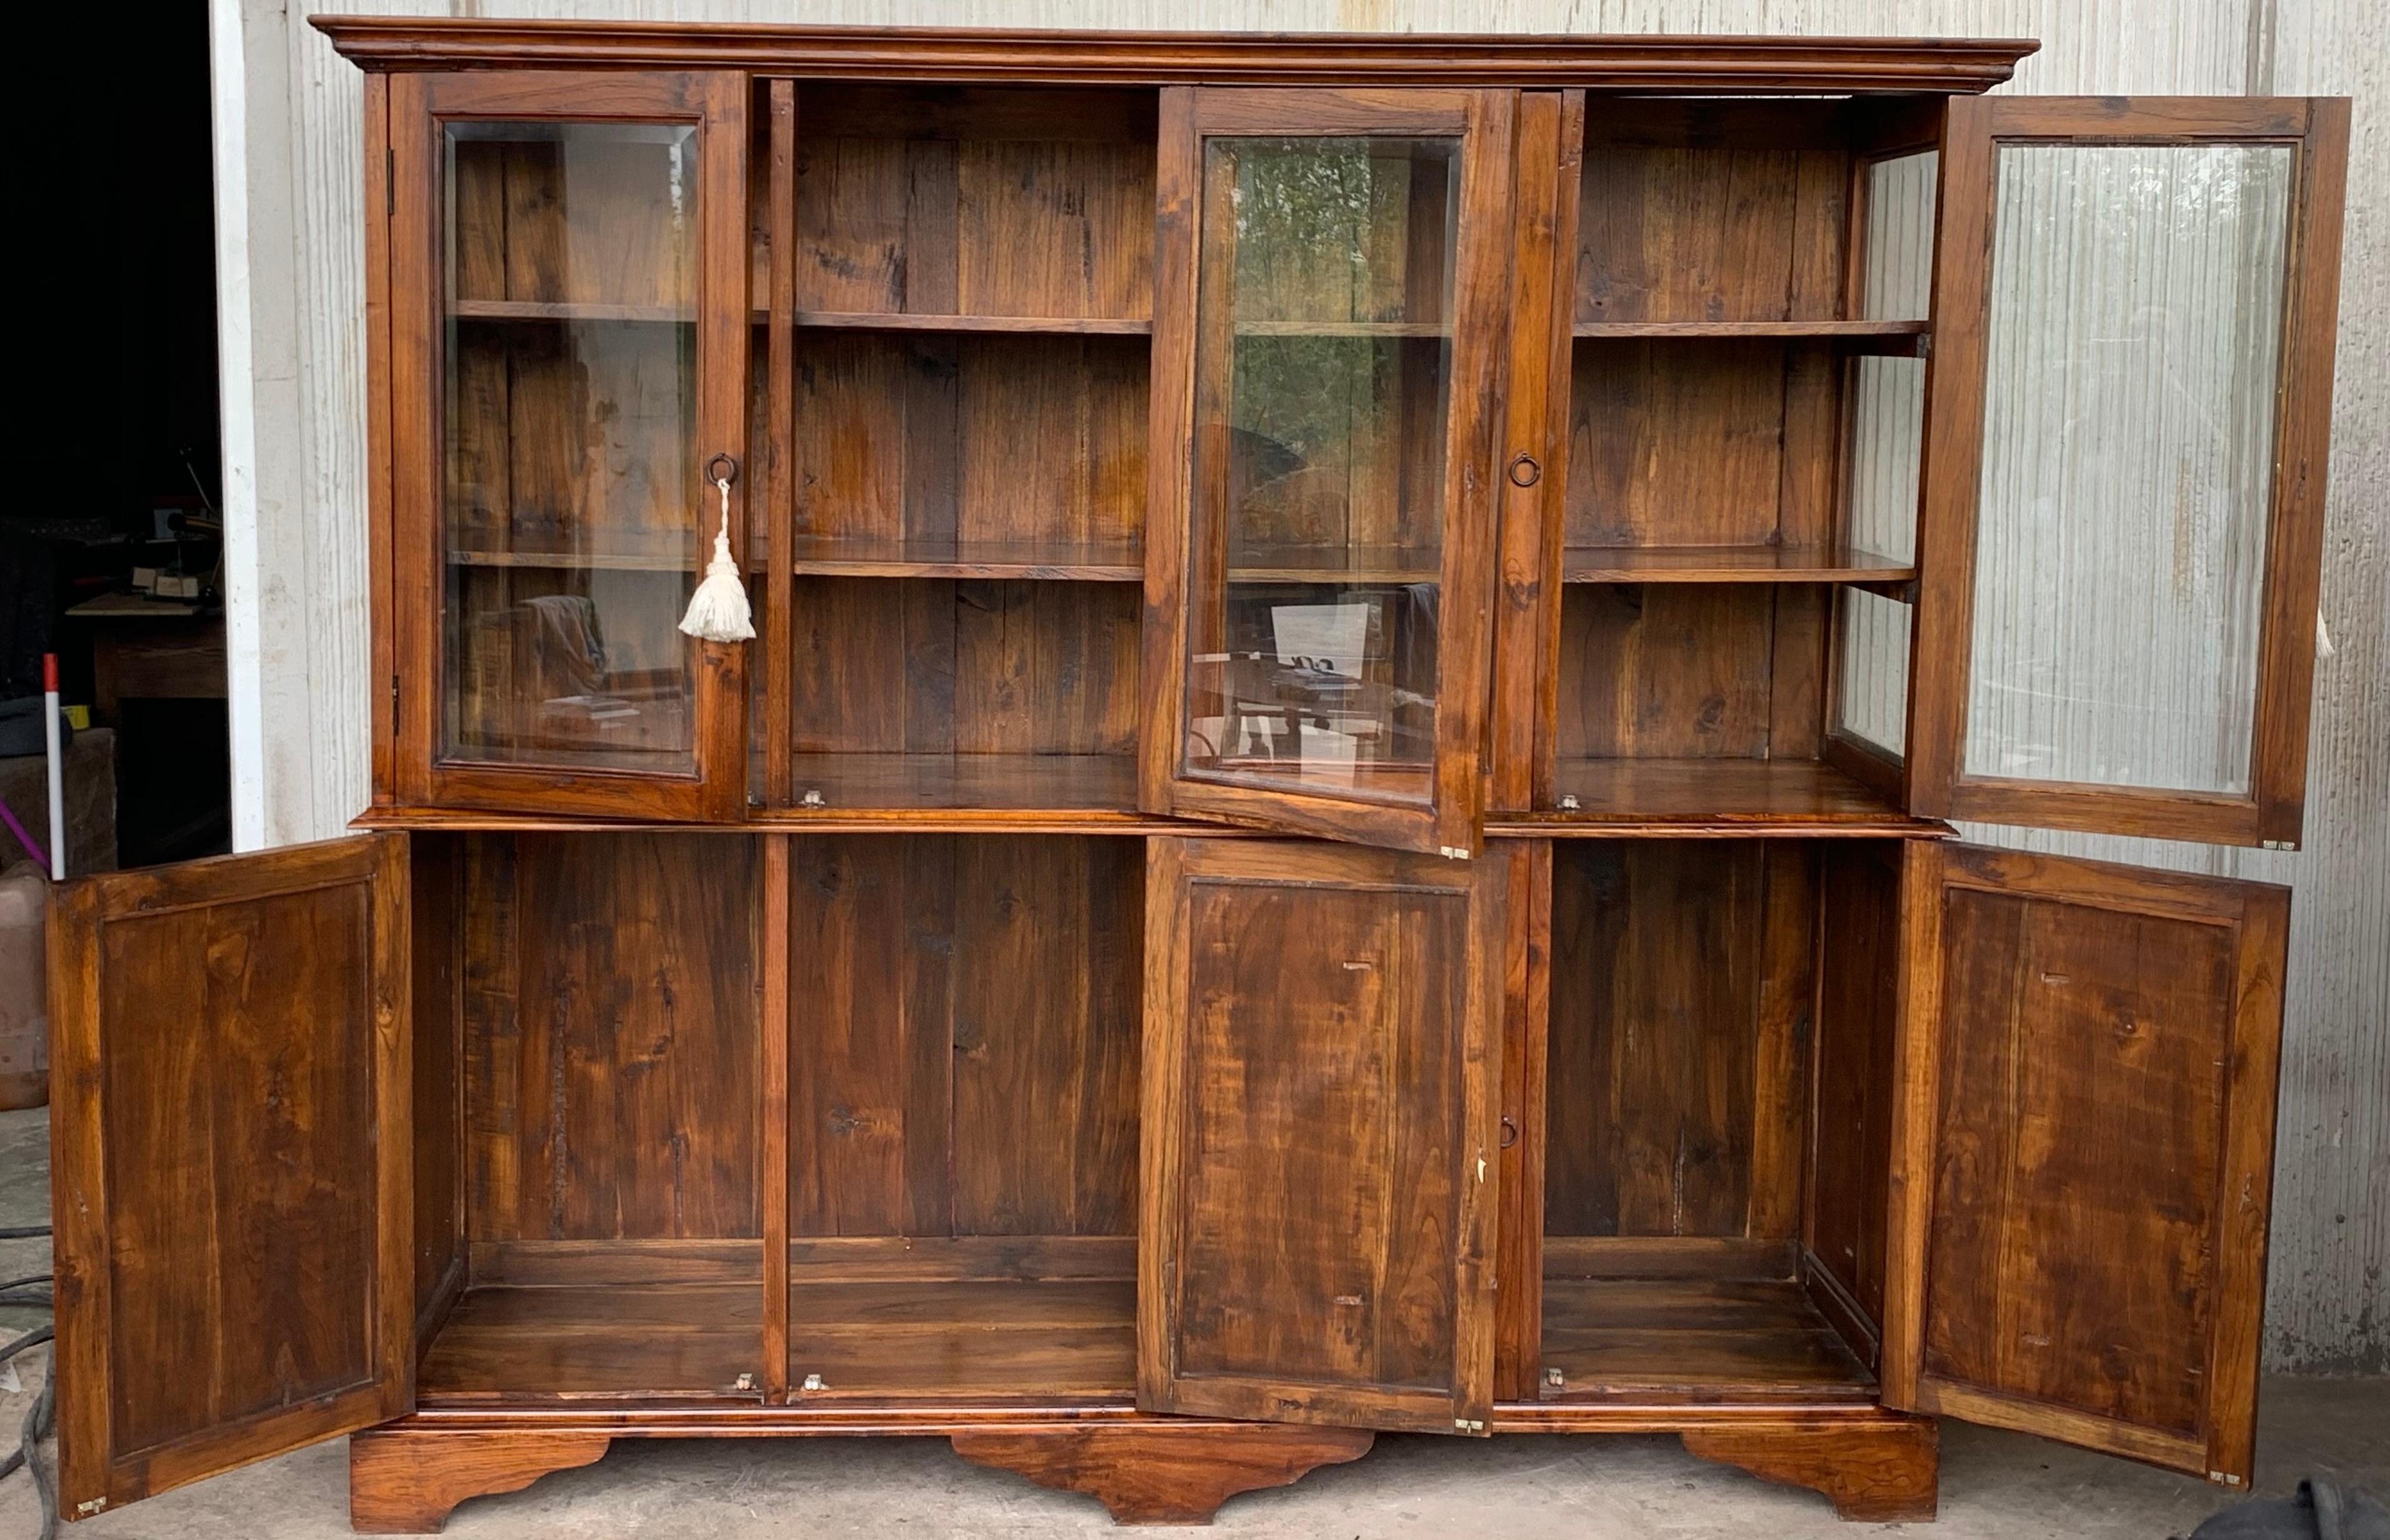 Walnut 19th Century Large Cupboard or Bookcase with Glass Vitrine, Pine, Spain Restored For Sale